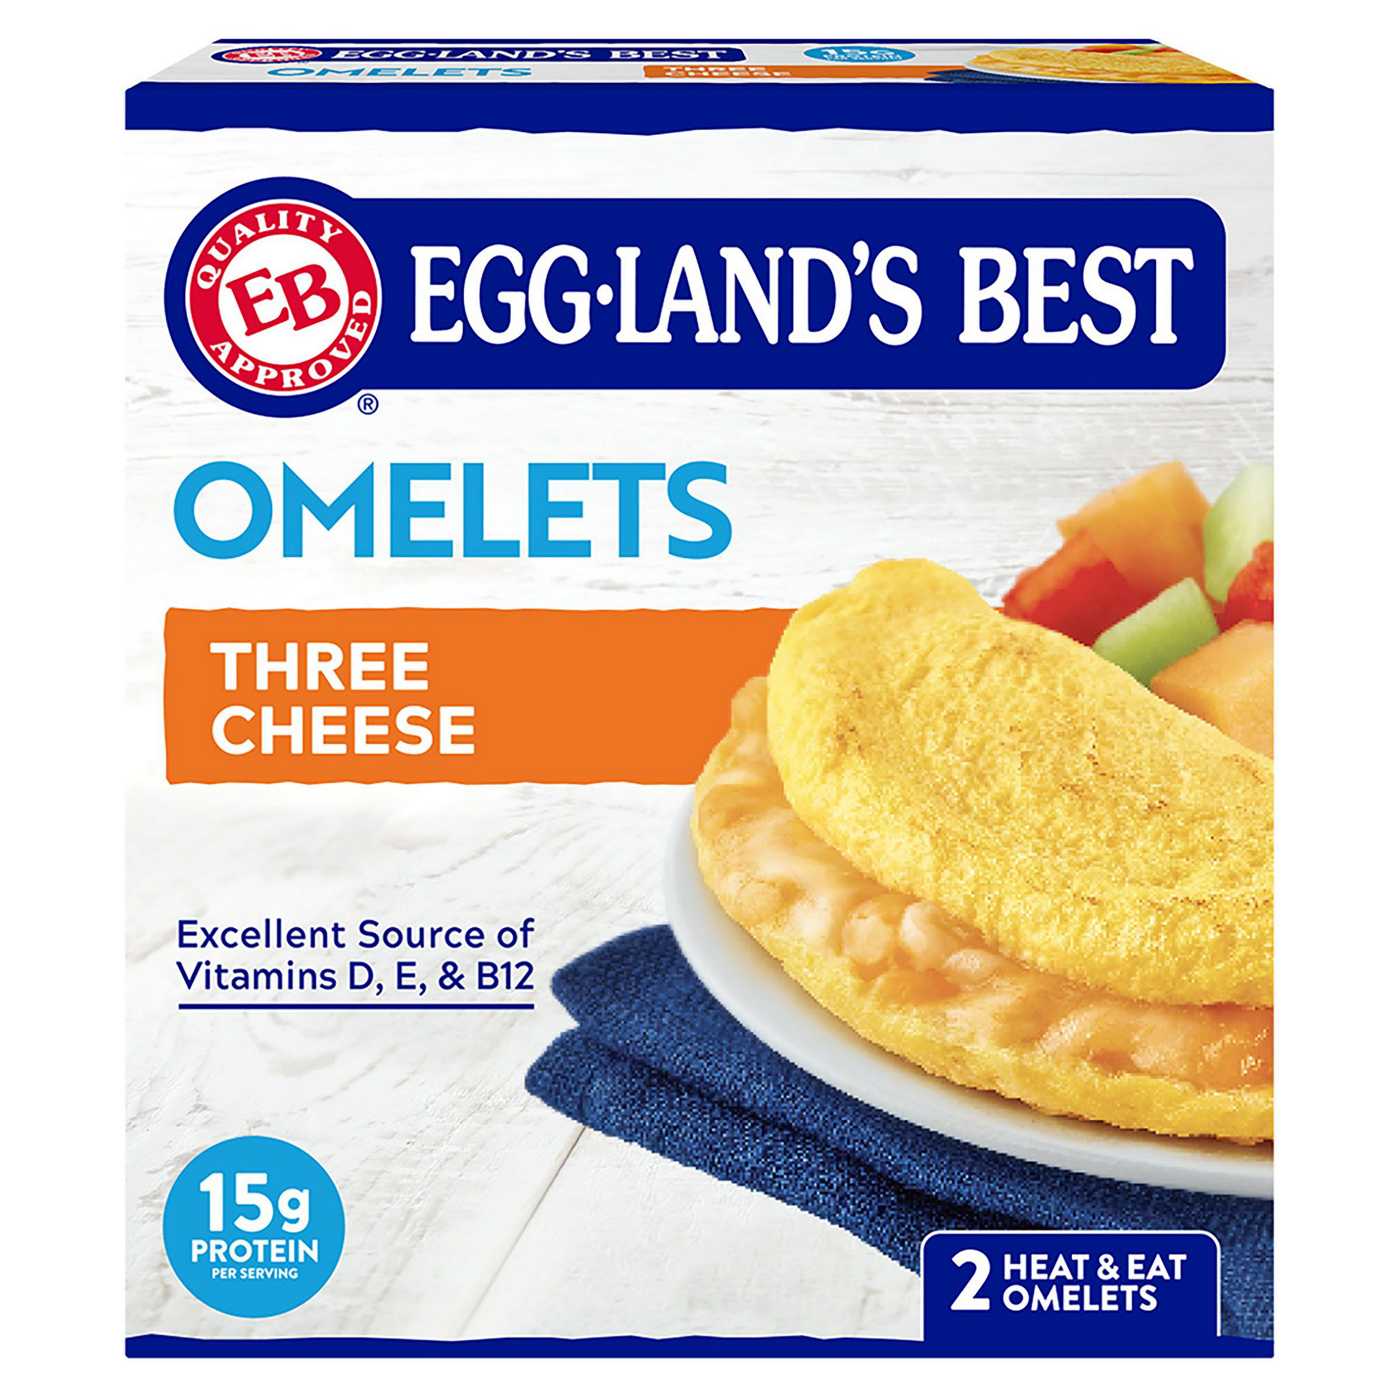 Eggland's Best Three Cheese Omelets; image 1 of 9